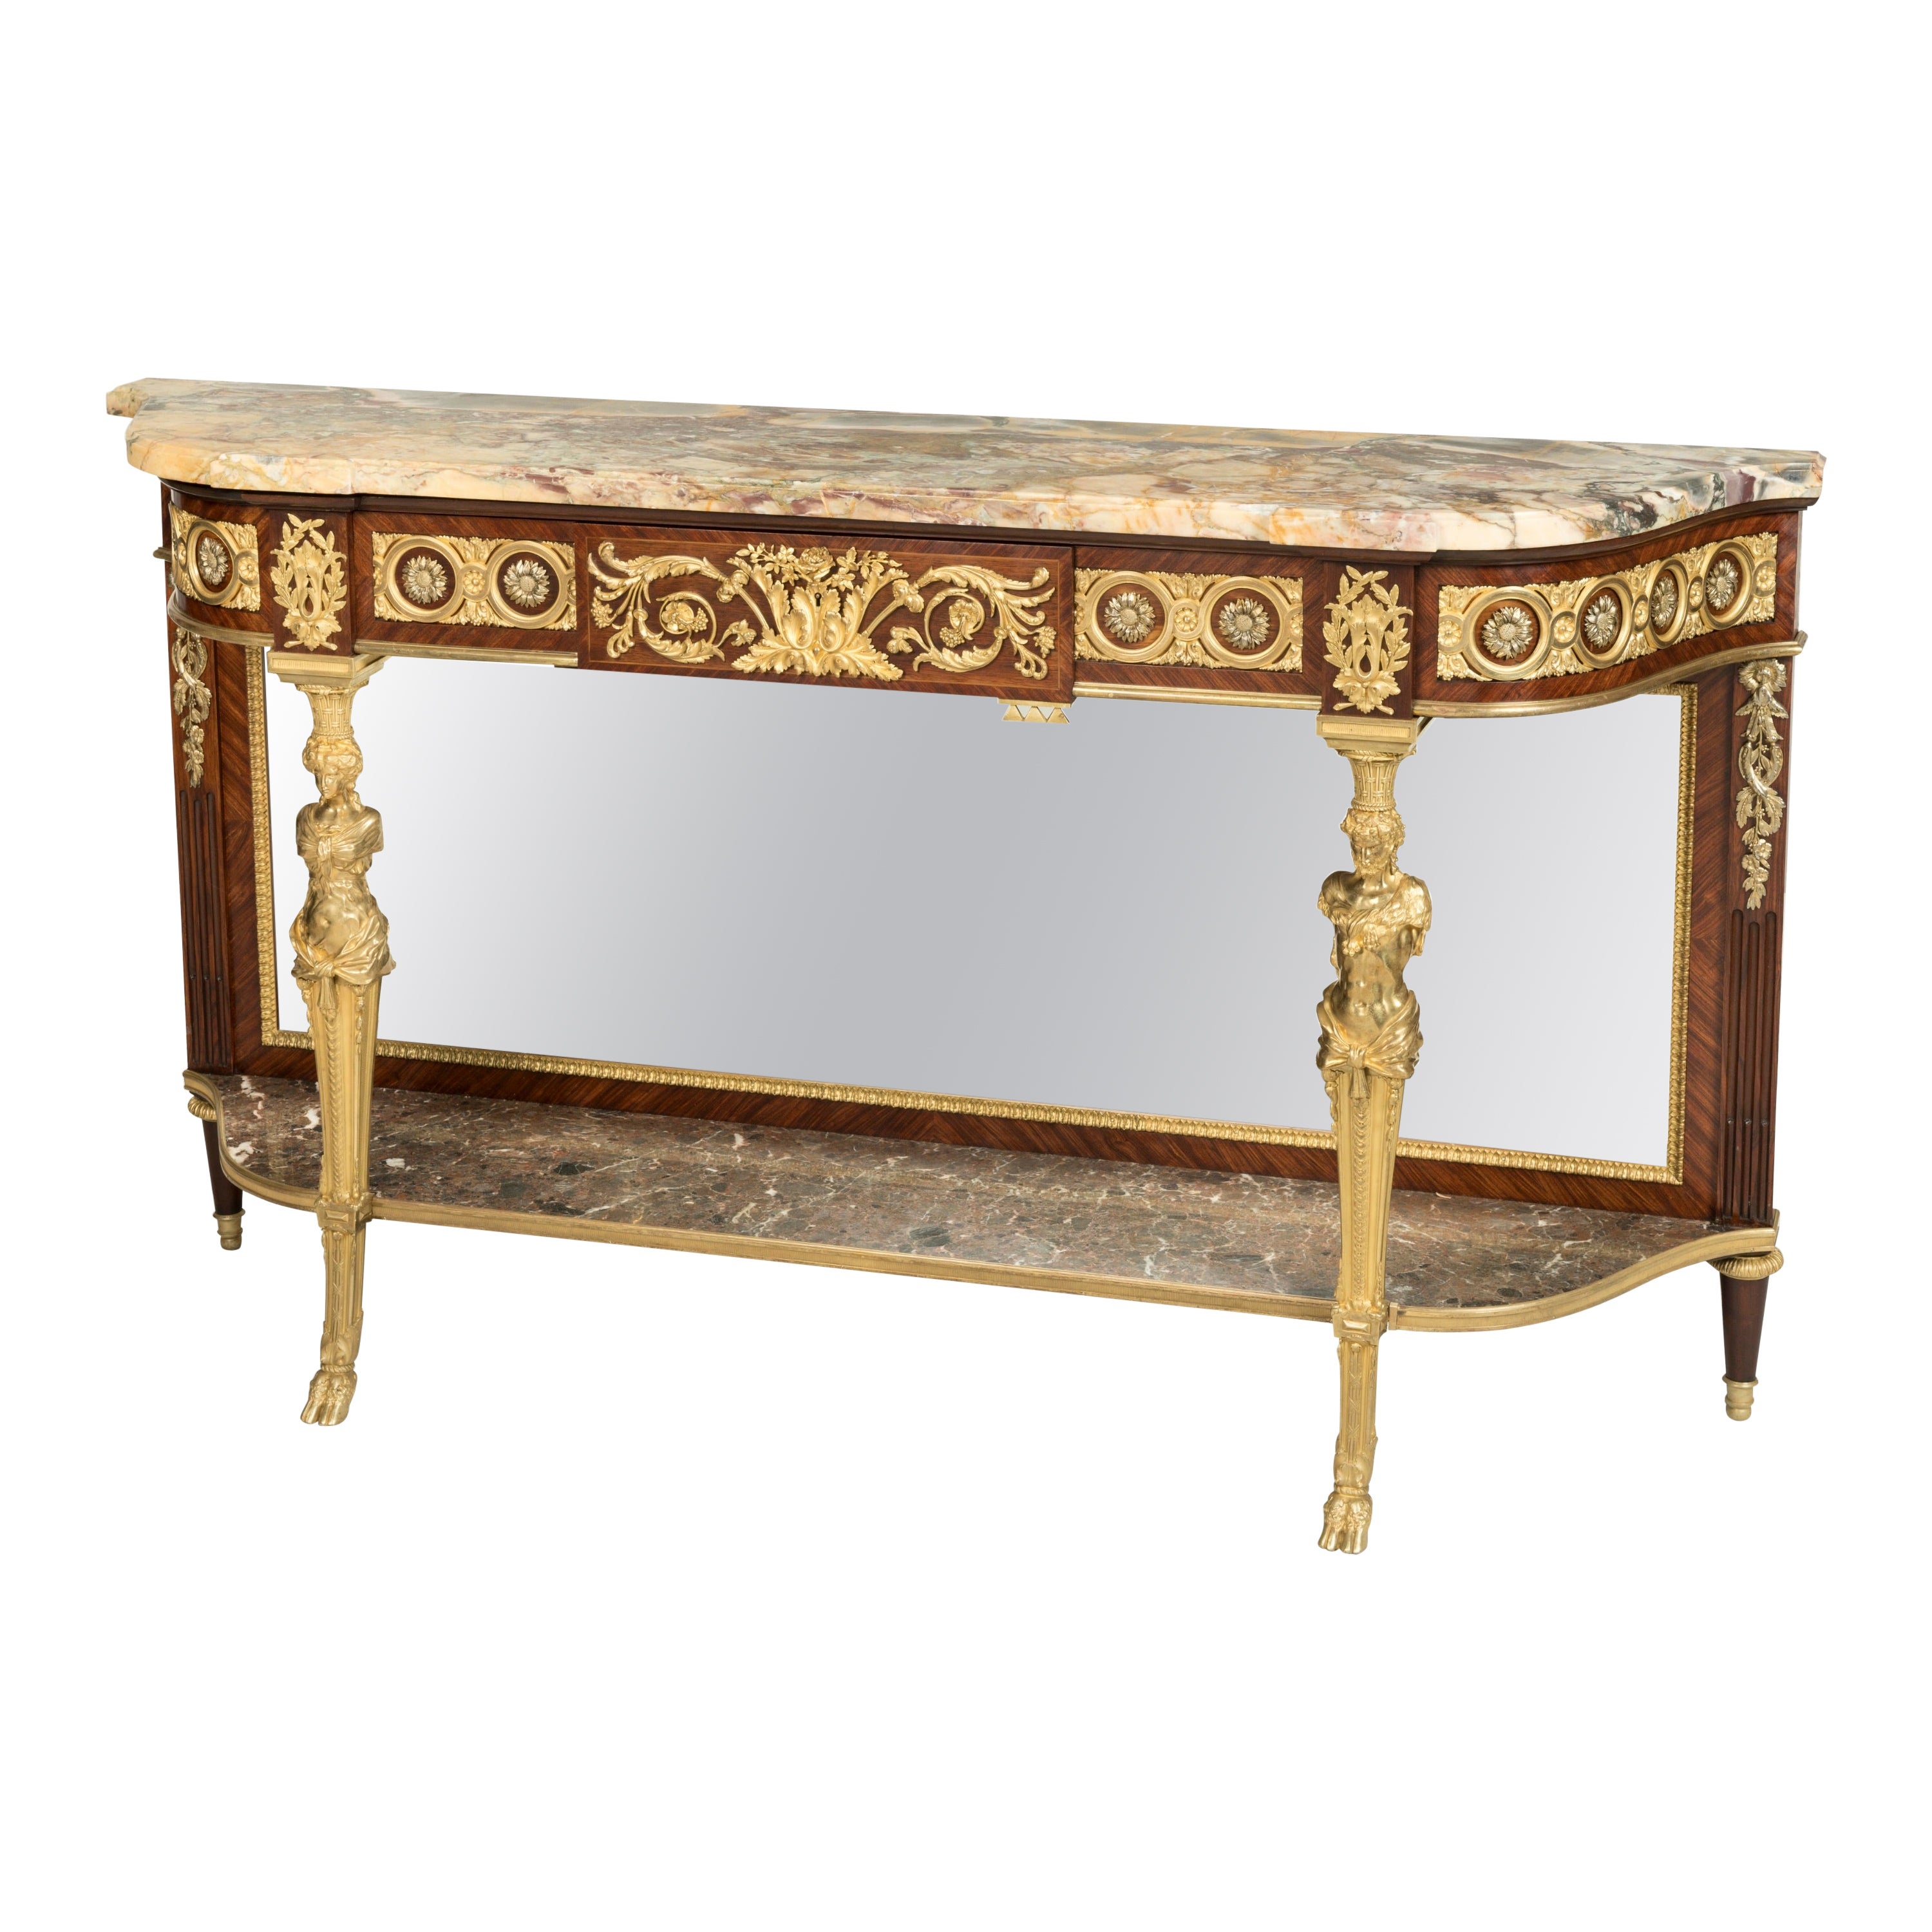 19th Century French Ormolu-Mounted Kingwood Console Table in the Louis XVI Style